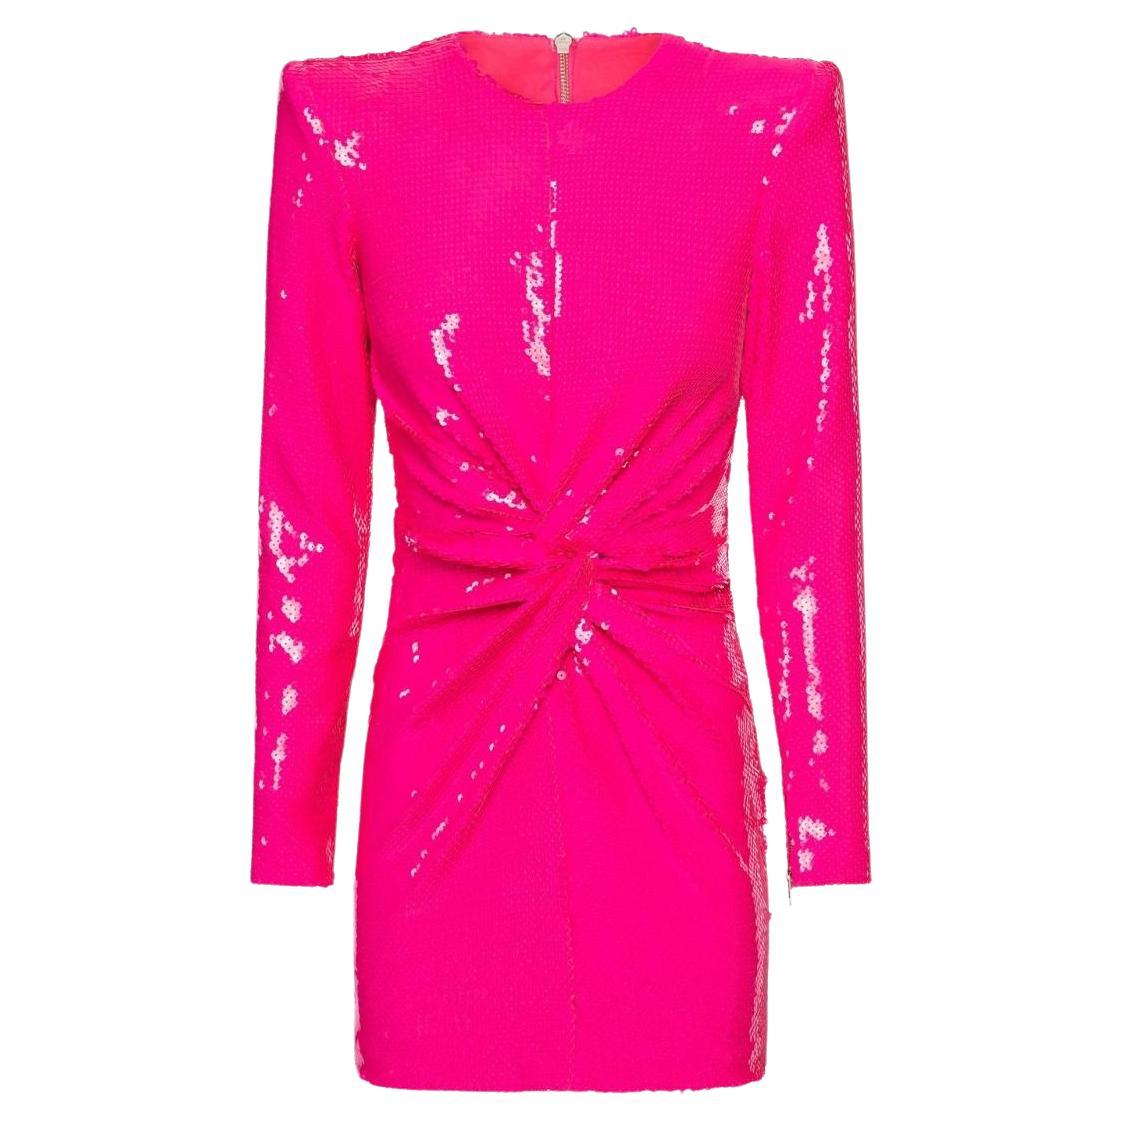 Alex Perry Jade Sequin-embellished Structured Mini Dress sz AU 10 US6 For Sale